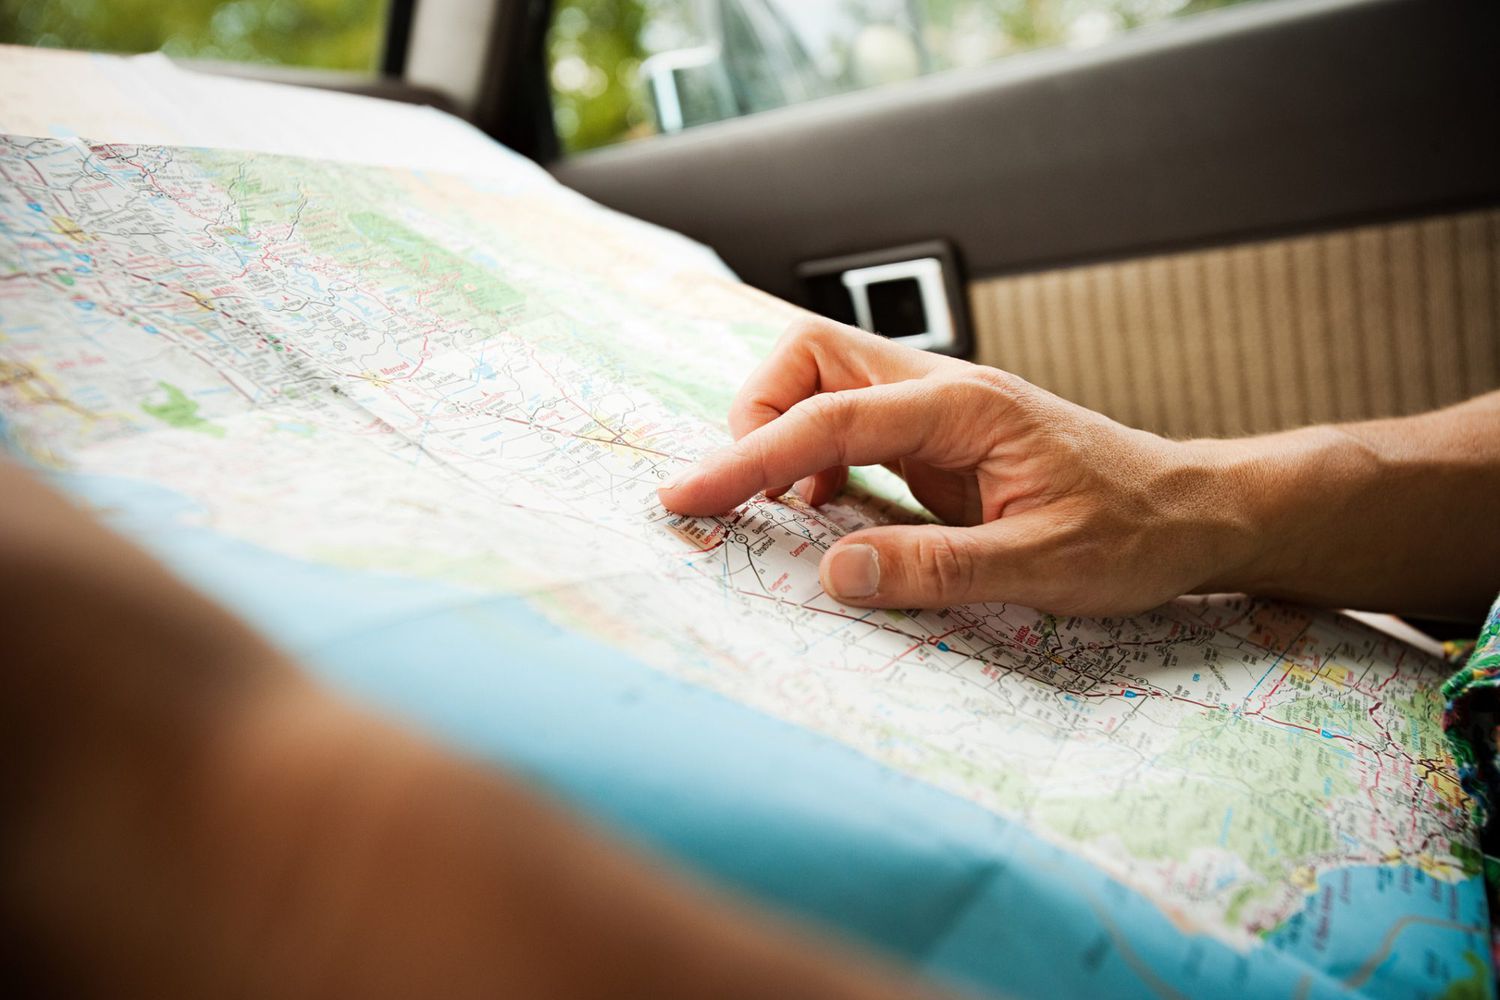 An image of a hand pointing to a map.